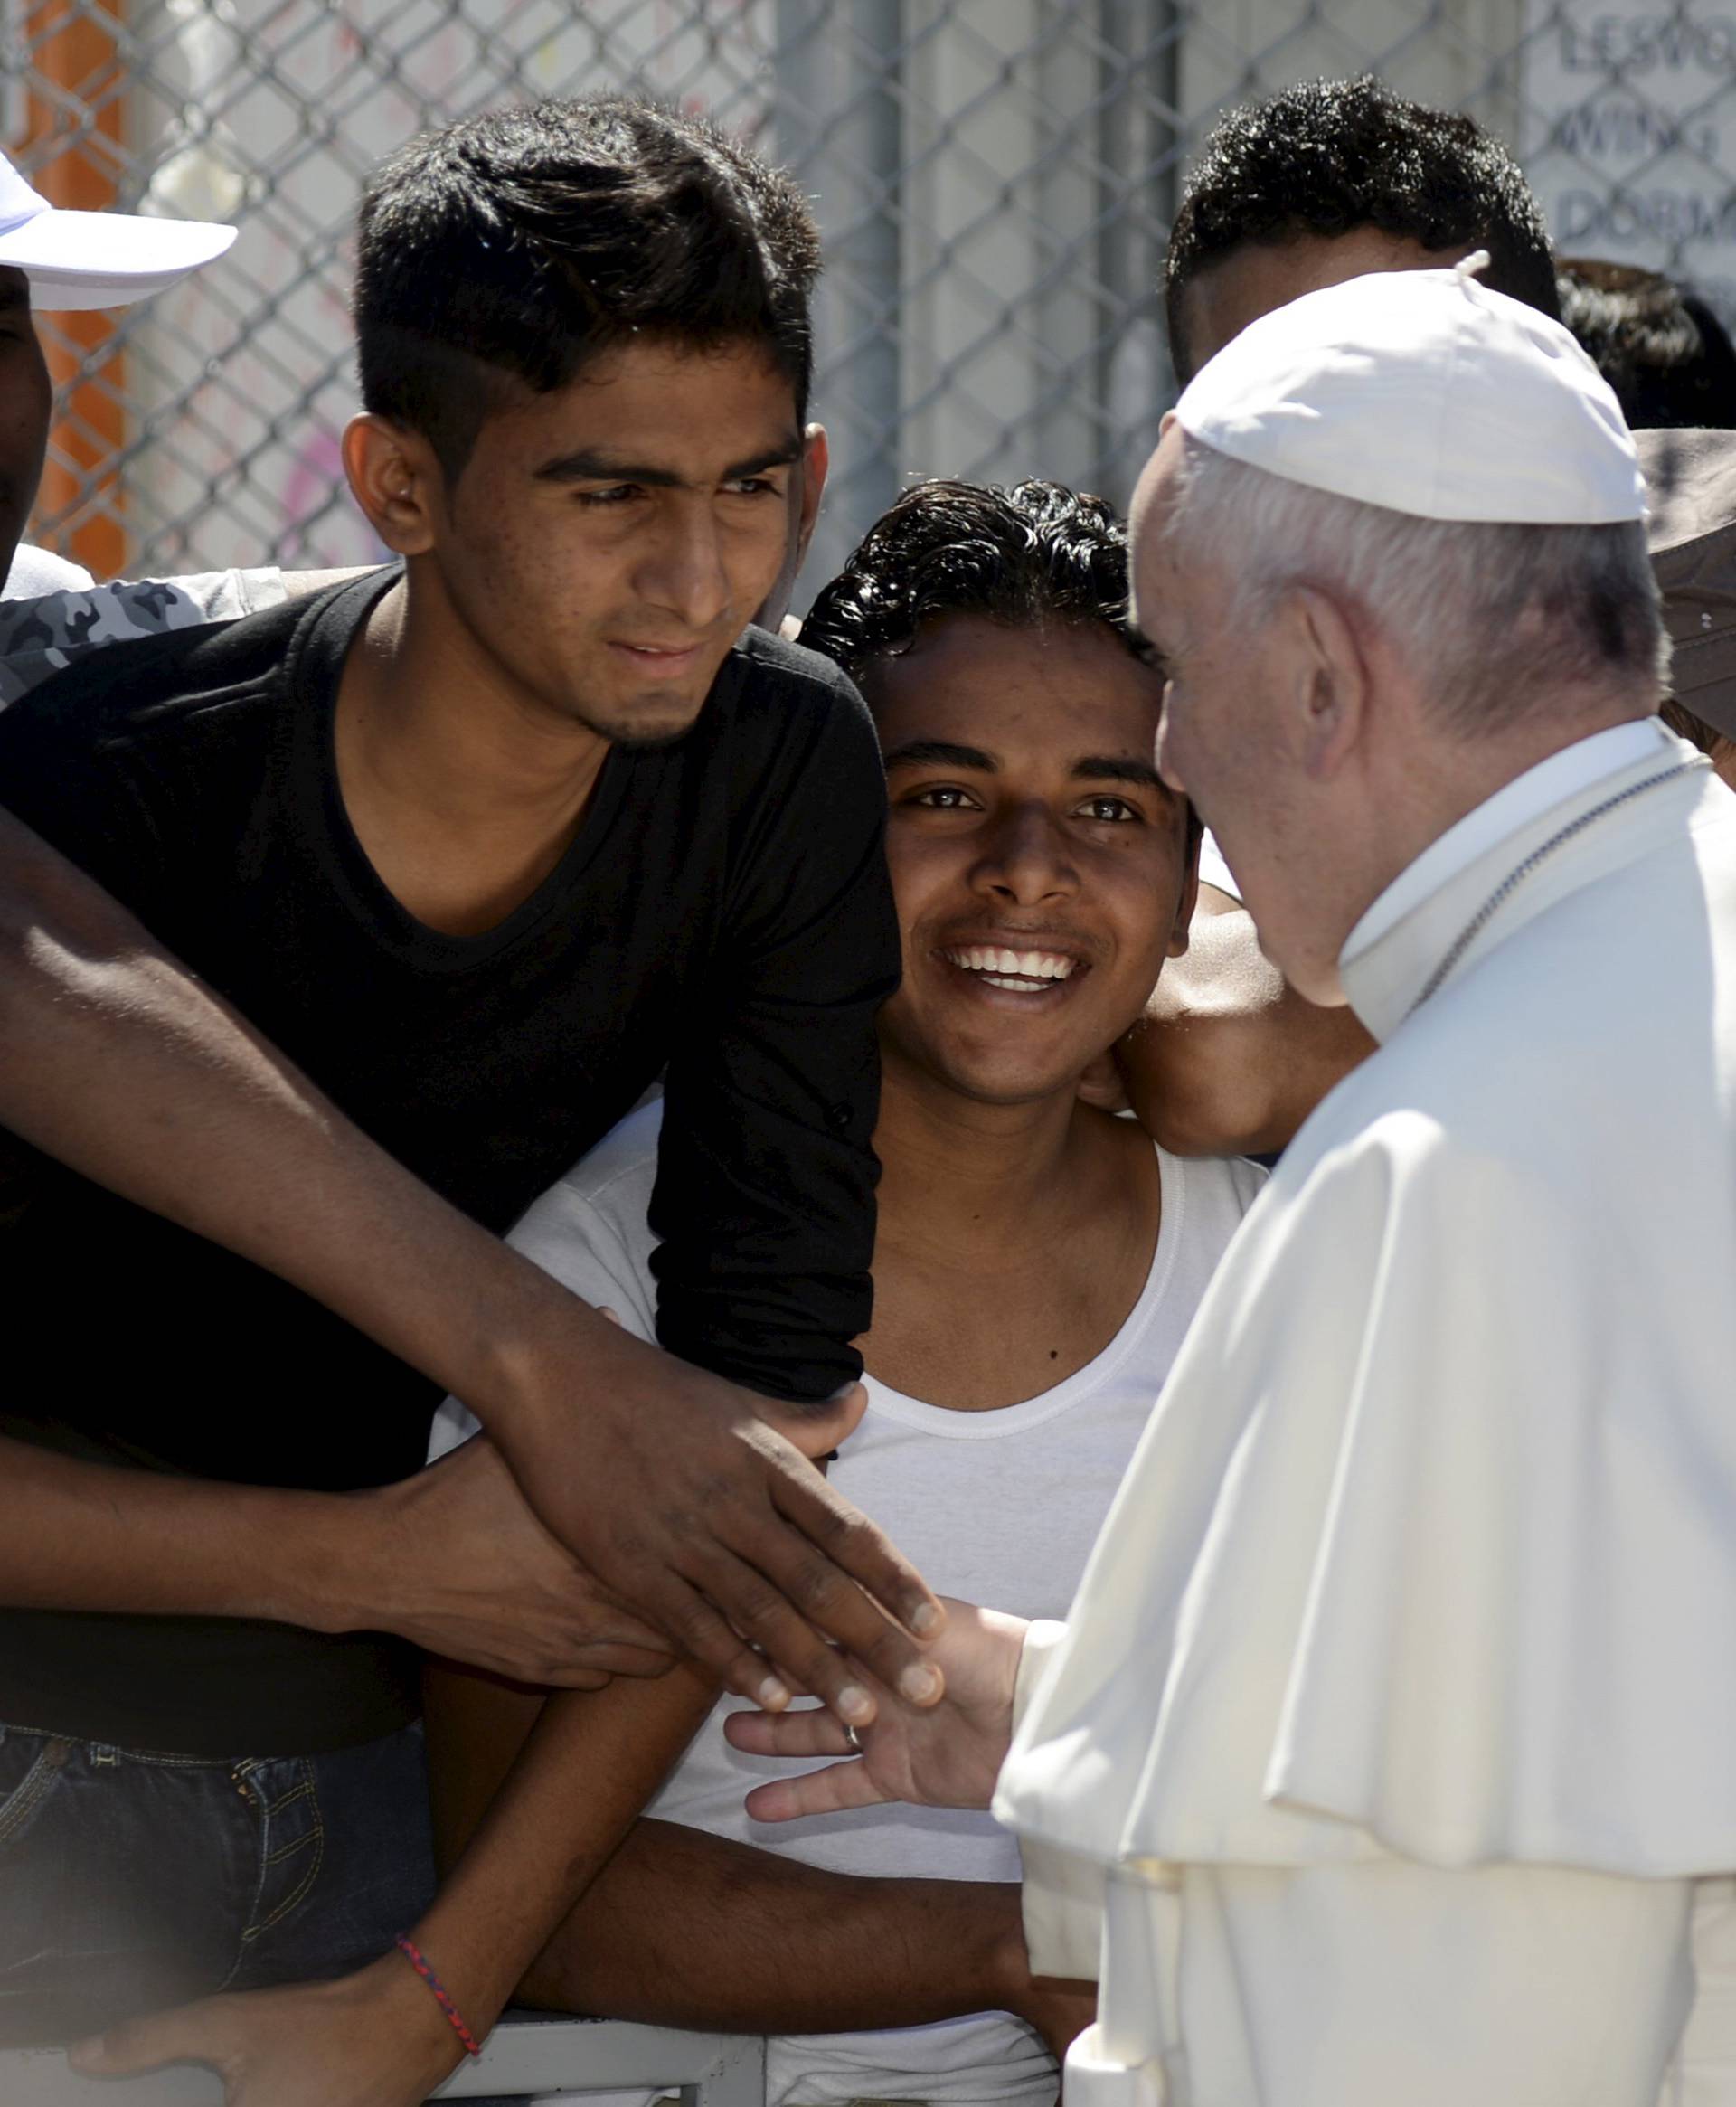 Pope Francis greets migrants and refugees at the Moria refugee camp near the port of Mytilene, on the Greek island of Lesbos 